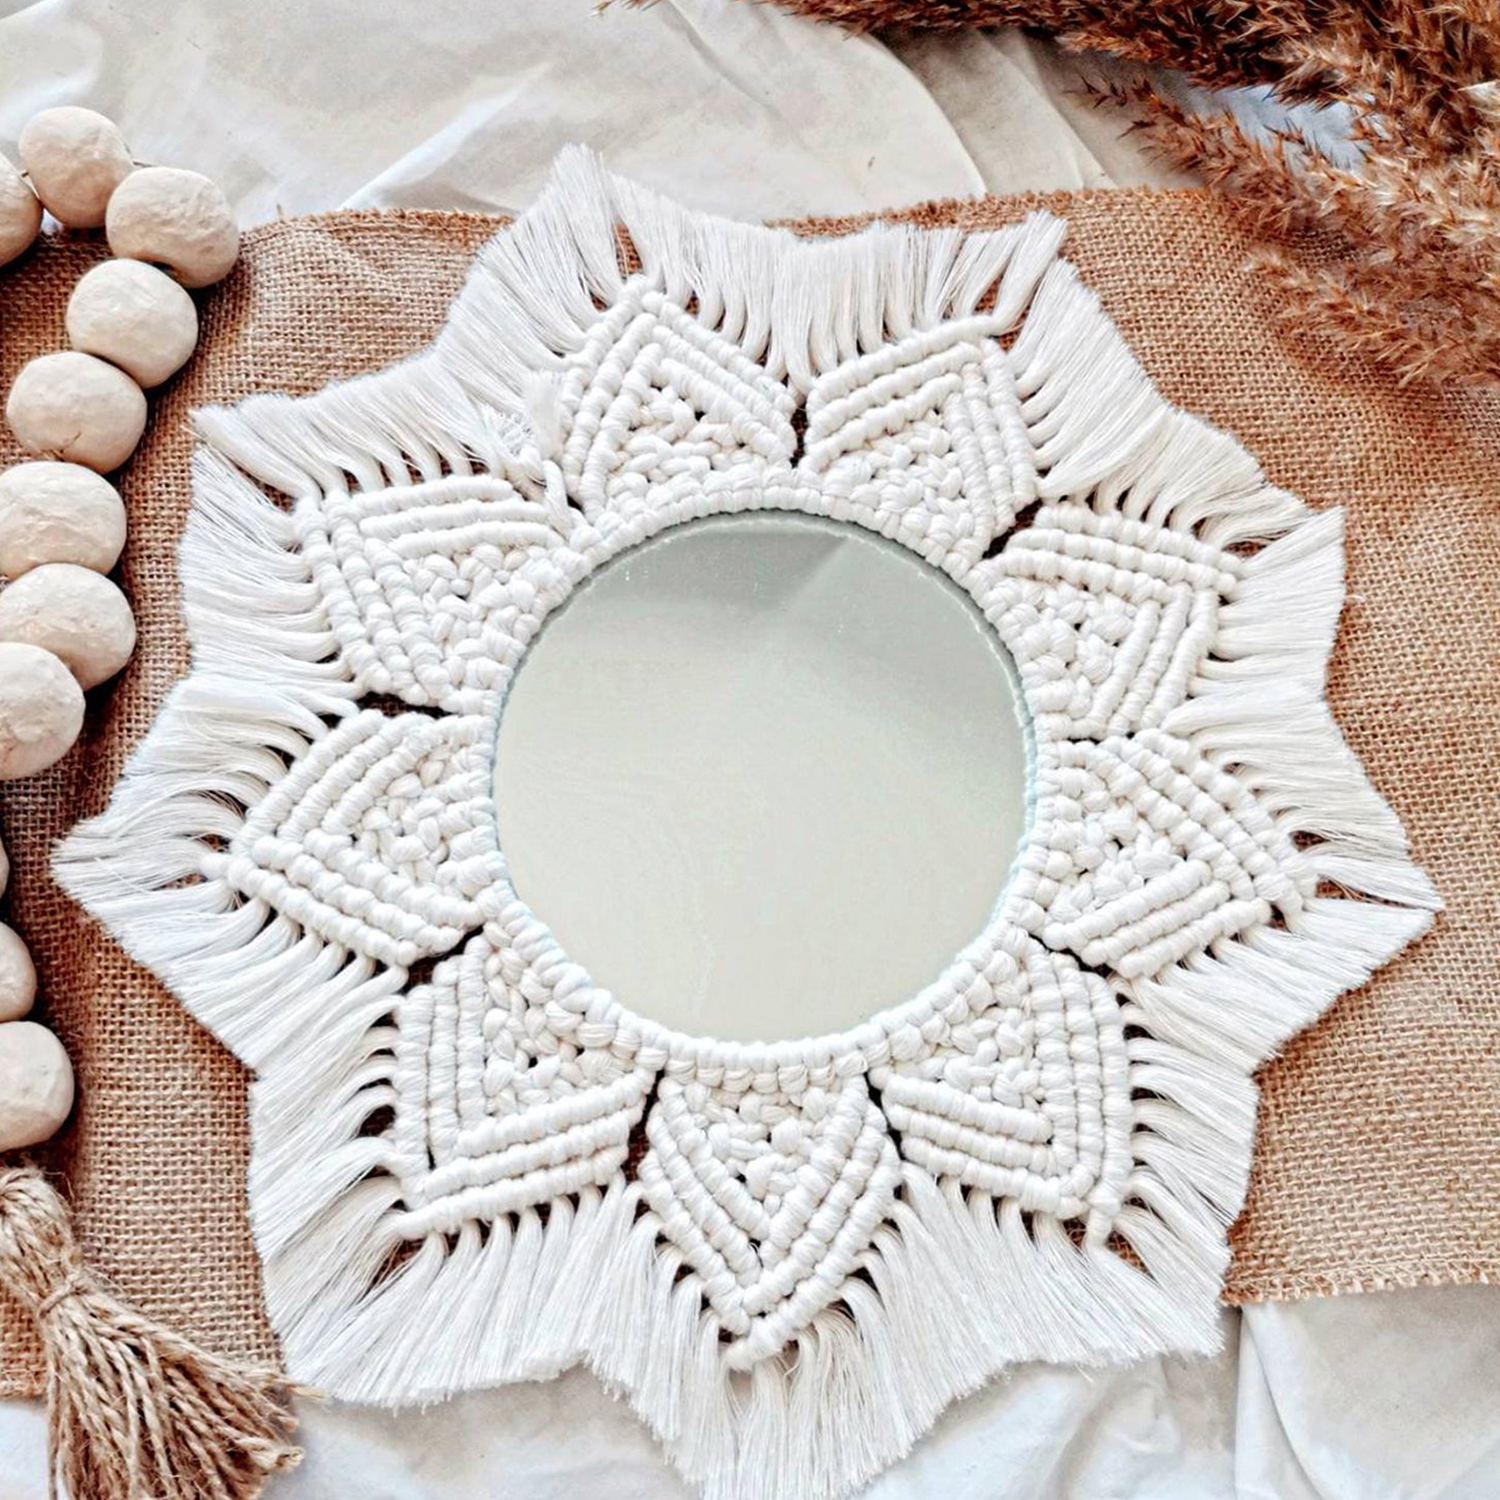 cotton handmade macrame wall decorative mirrors  manufacturer, Supplier and exporter